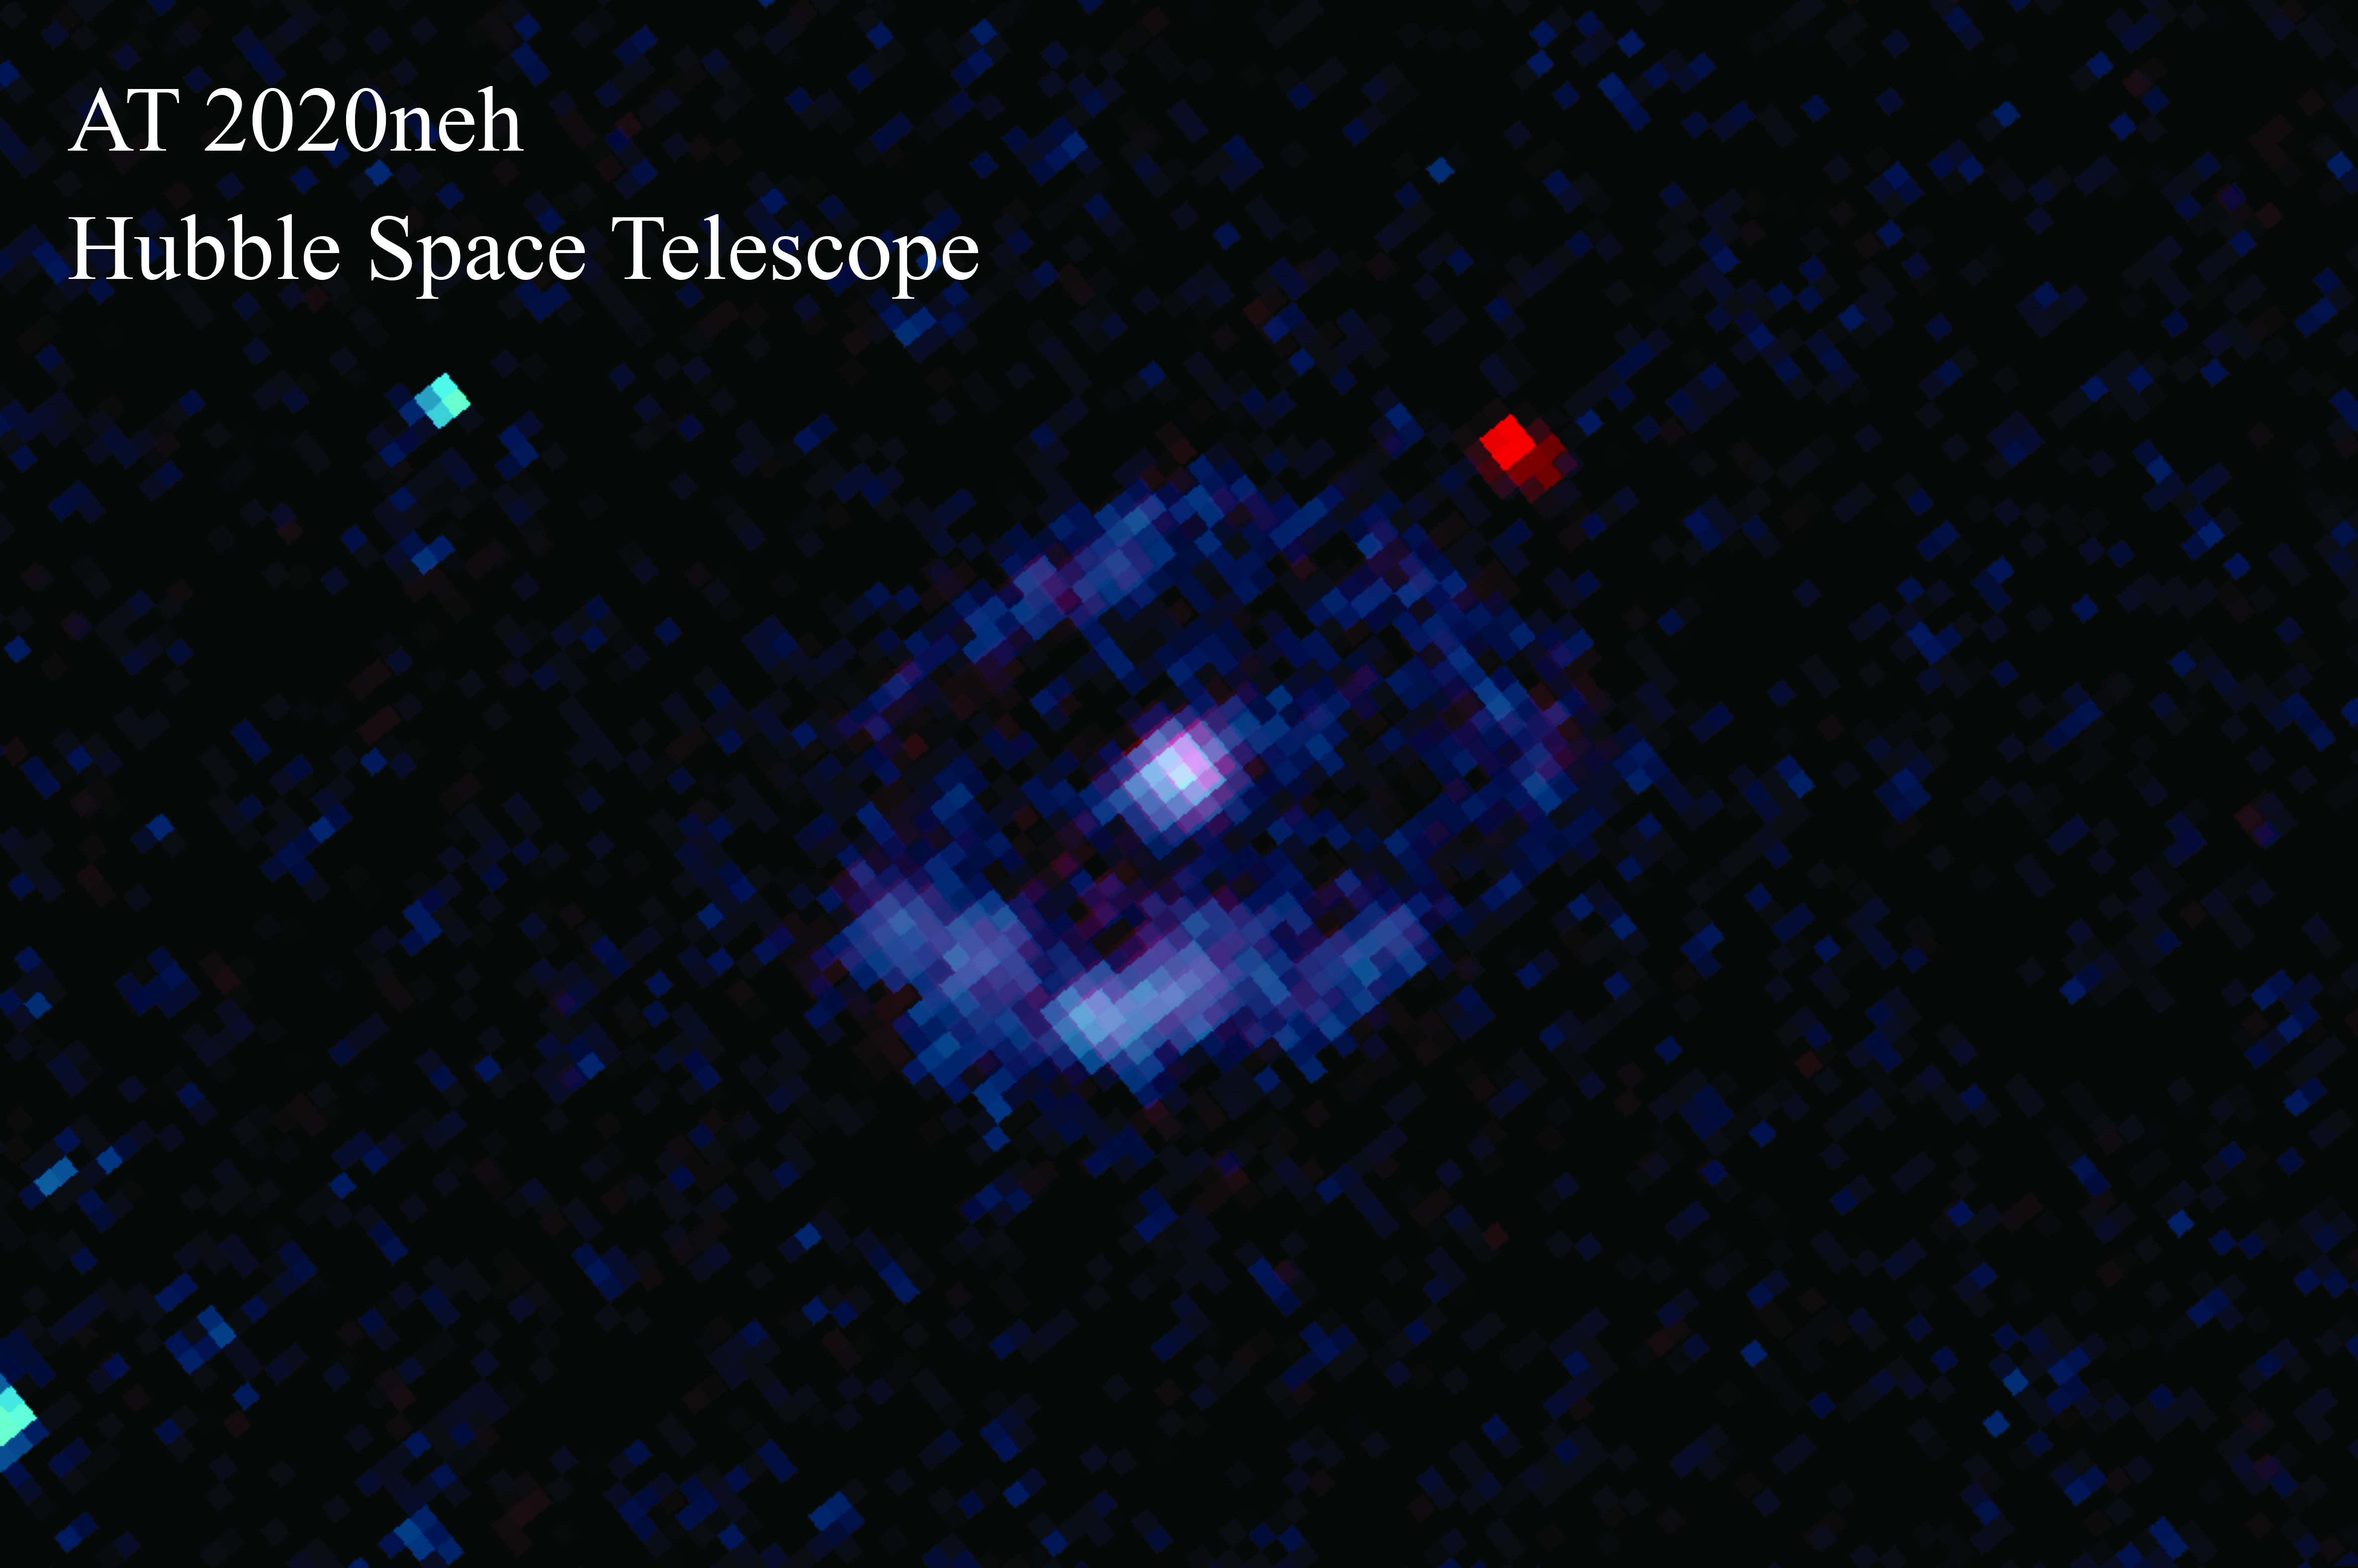 Astronomers have discovered a star being ripped apart by a black hole in the galaxy SDSS J152120.07+140410.5, which is 850 million light-years away.  The researchers sent the NASA space telescope 